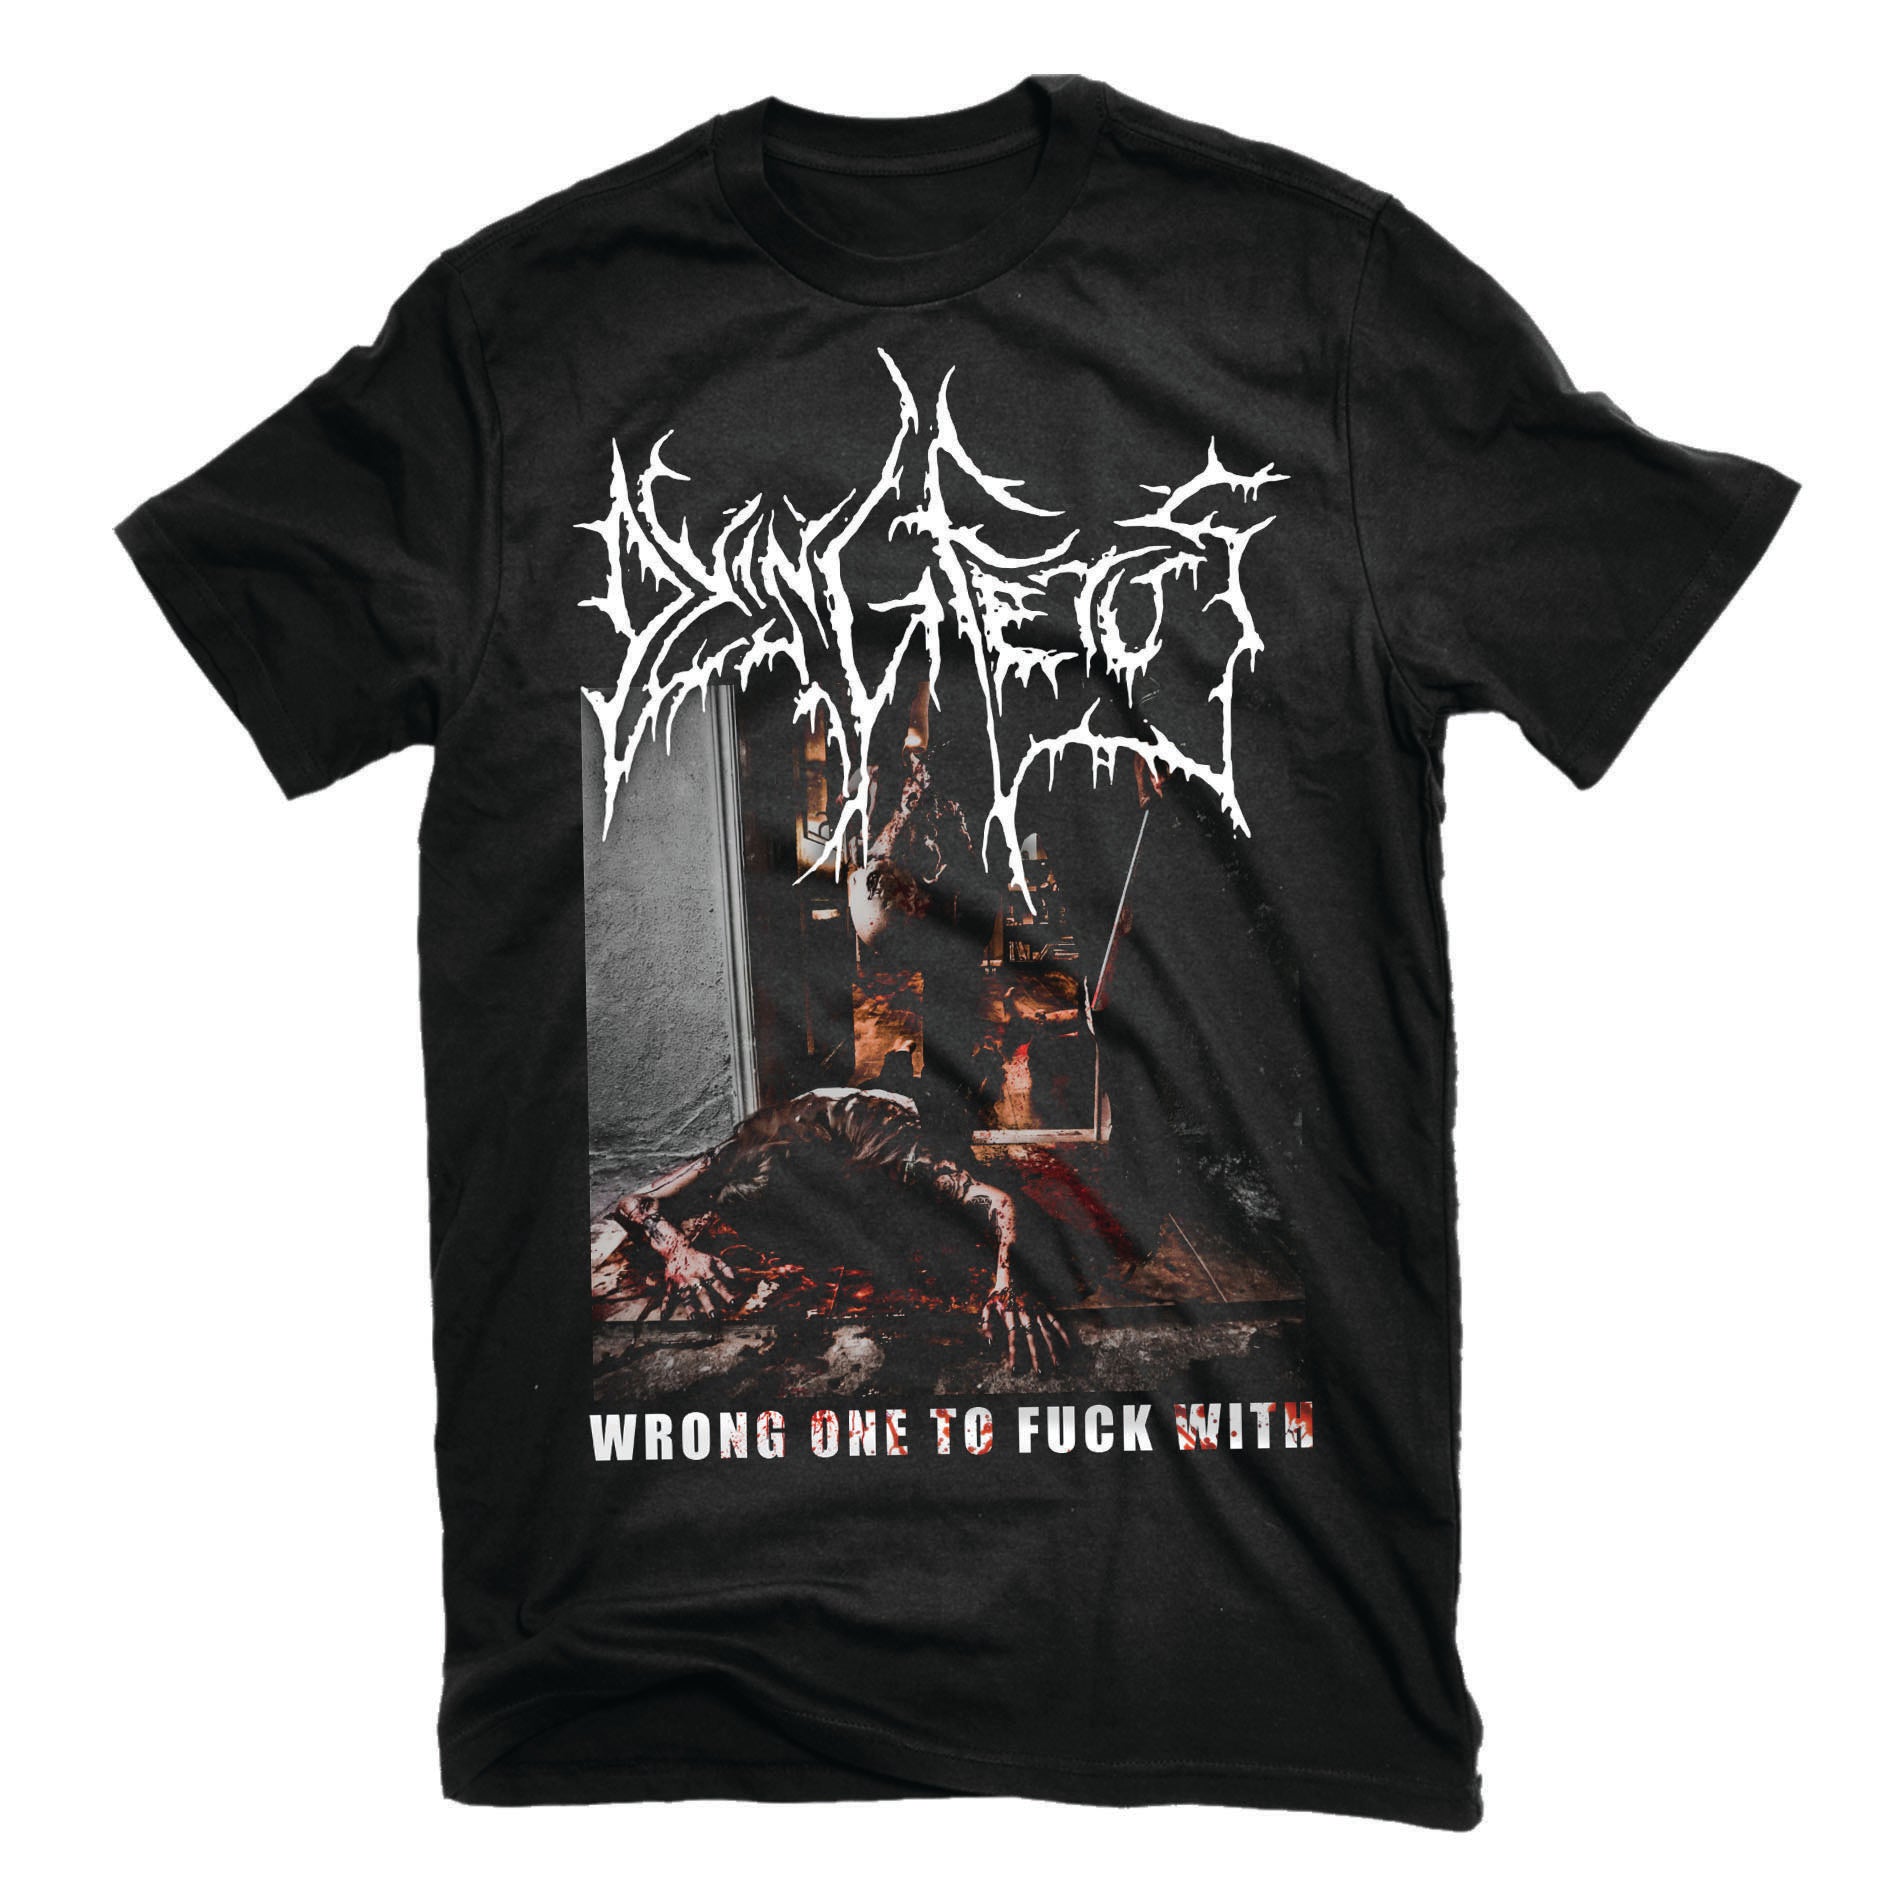 Dying Fetus "Wrong One To Fuck With" T-Shirt